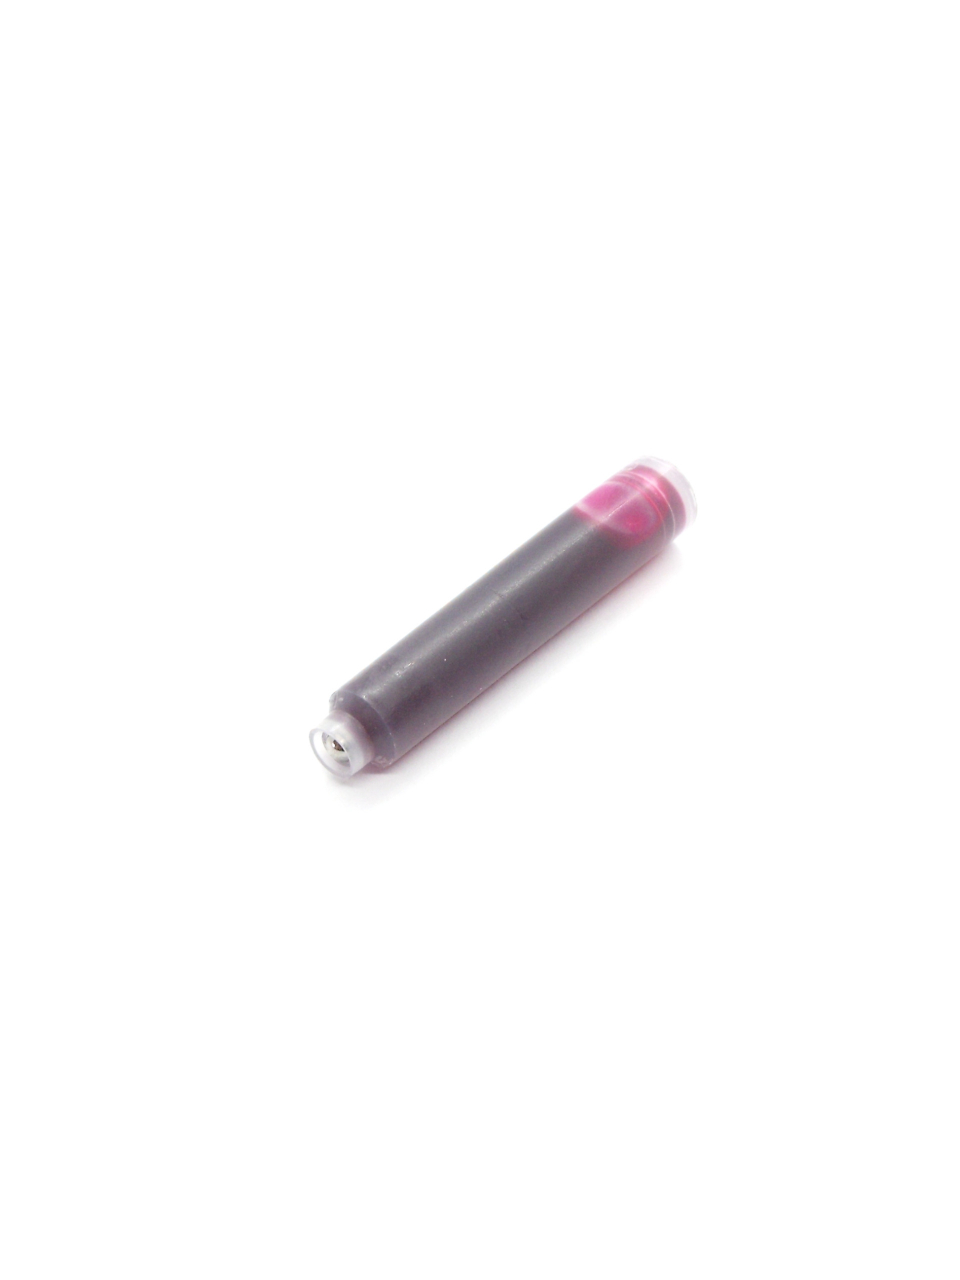 Cartridges For Regal Fountain Pens (Pink)